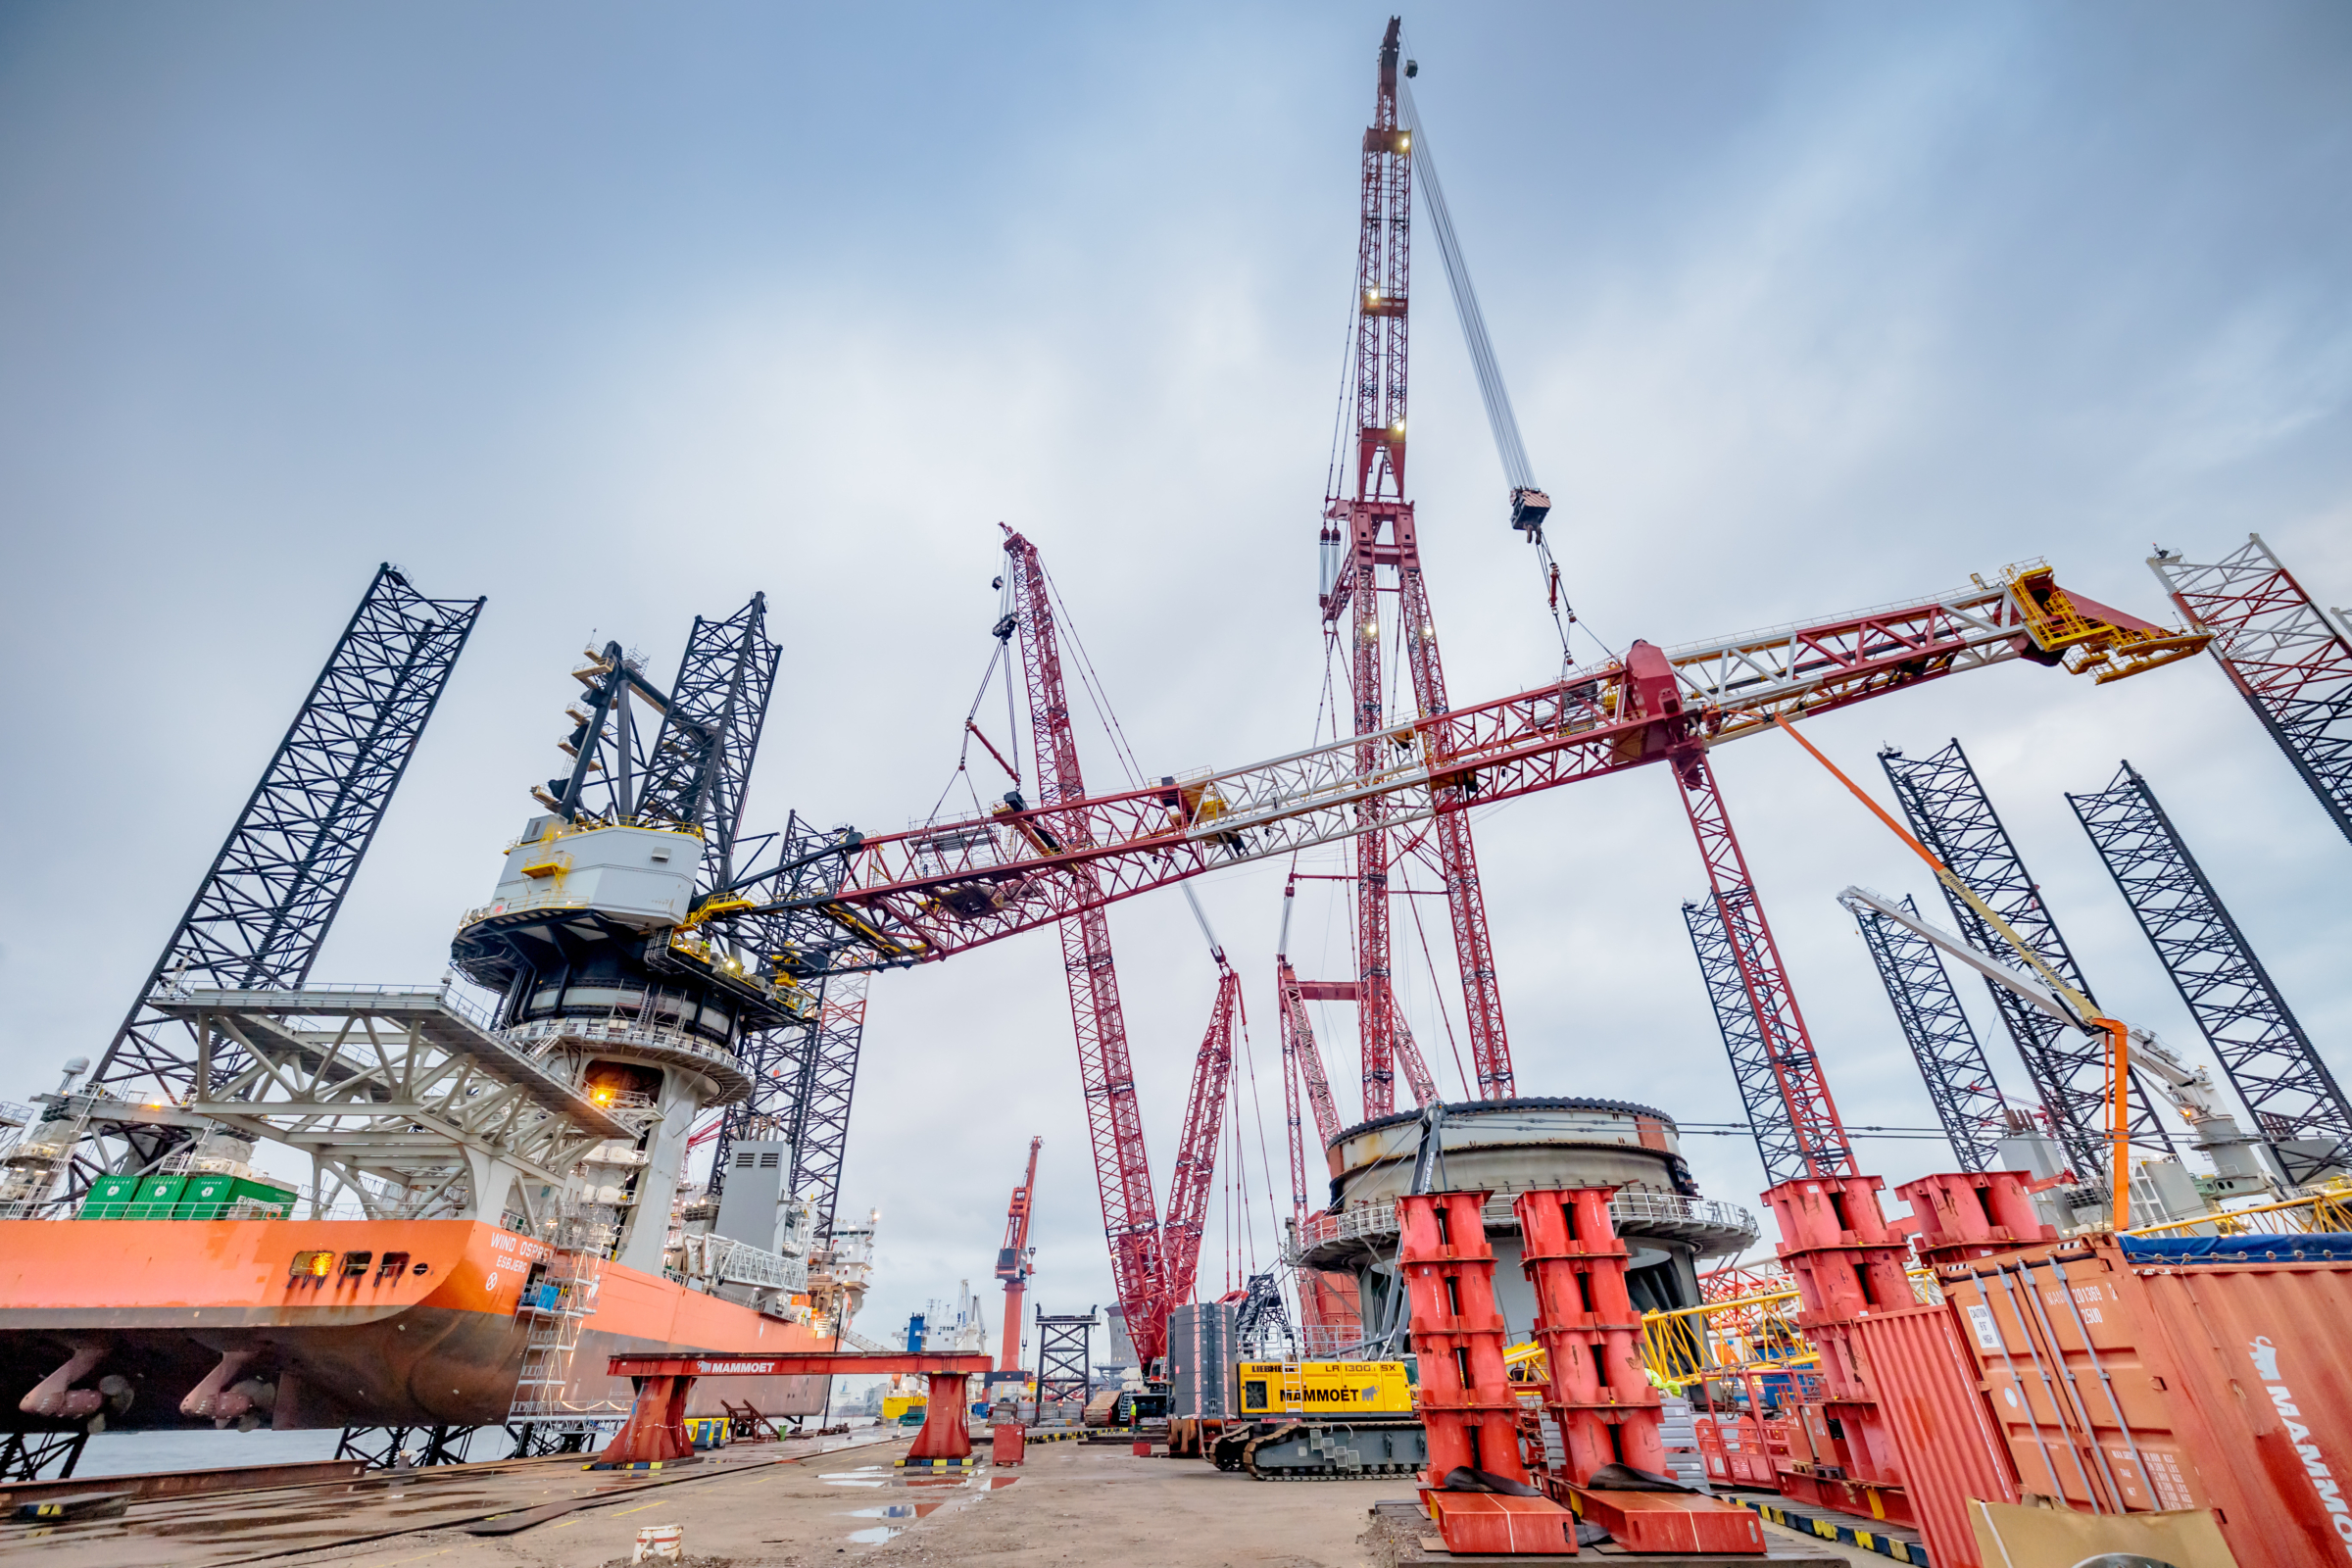 Crane replacements to support next-generation offshore wind turbine installations